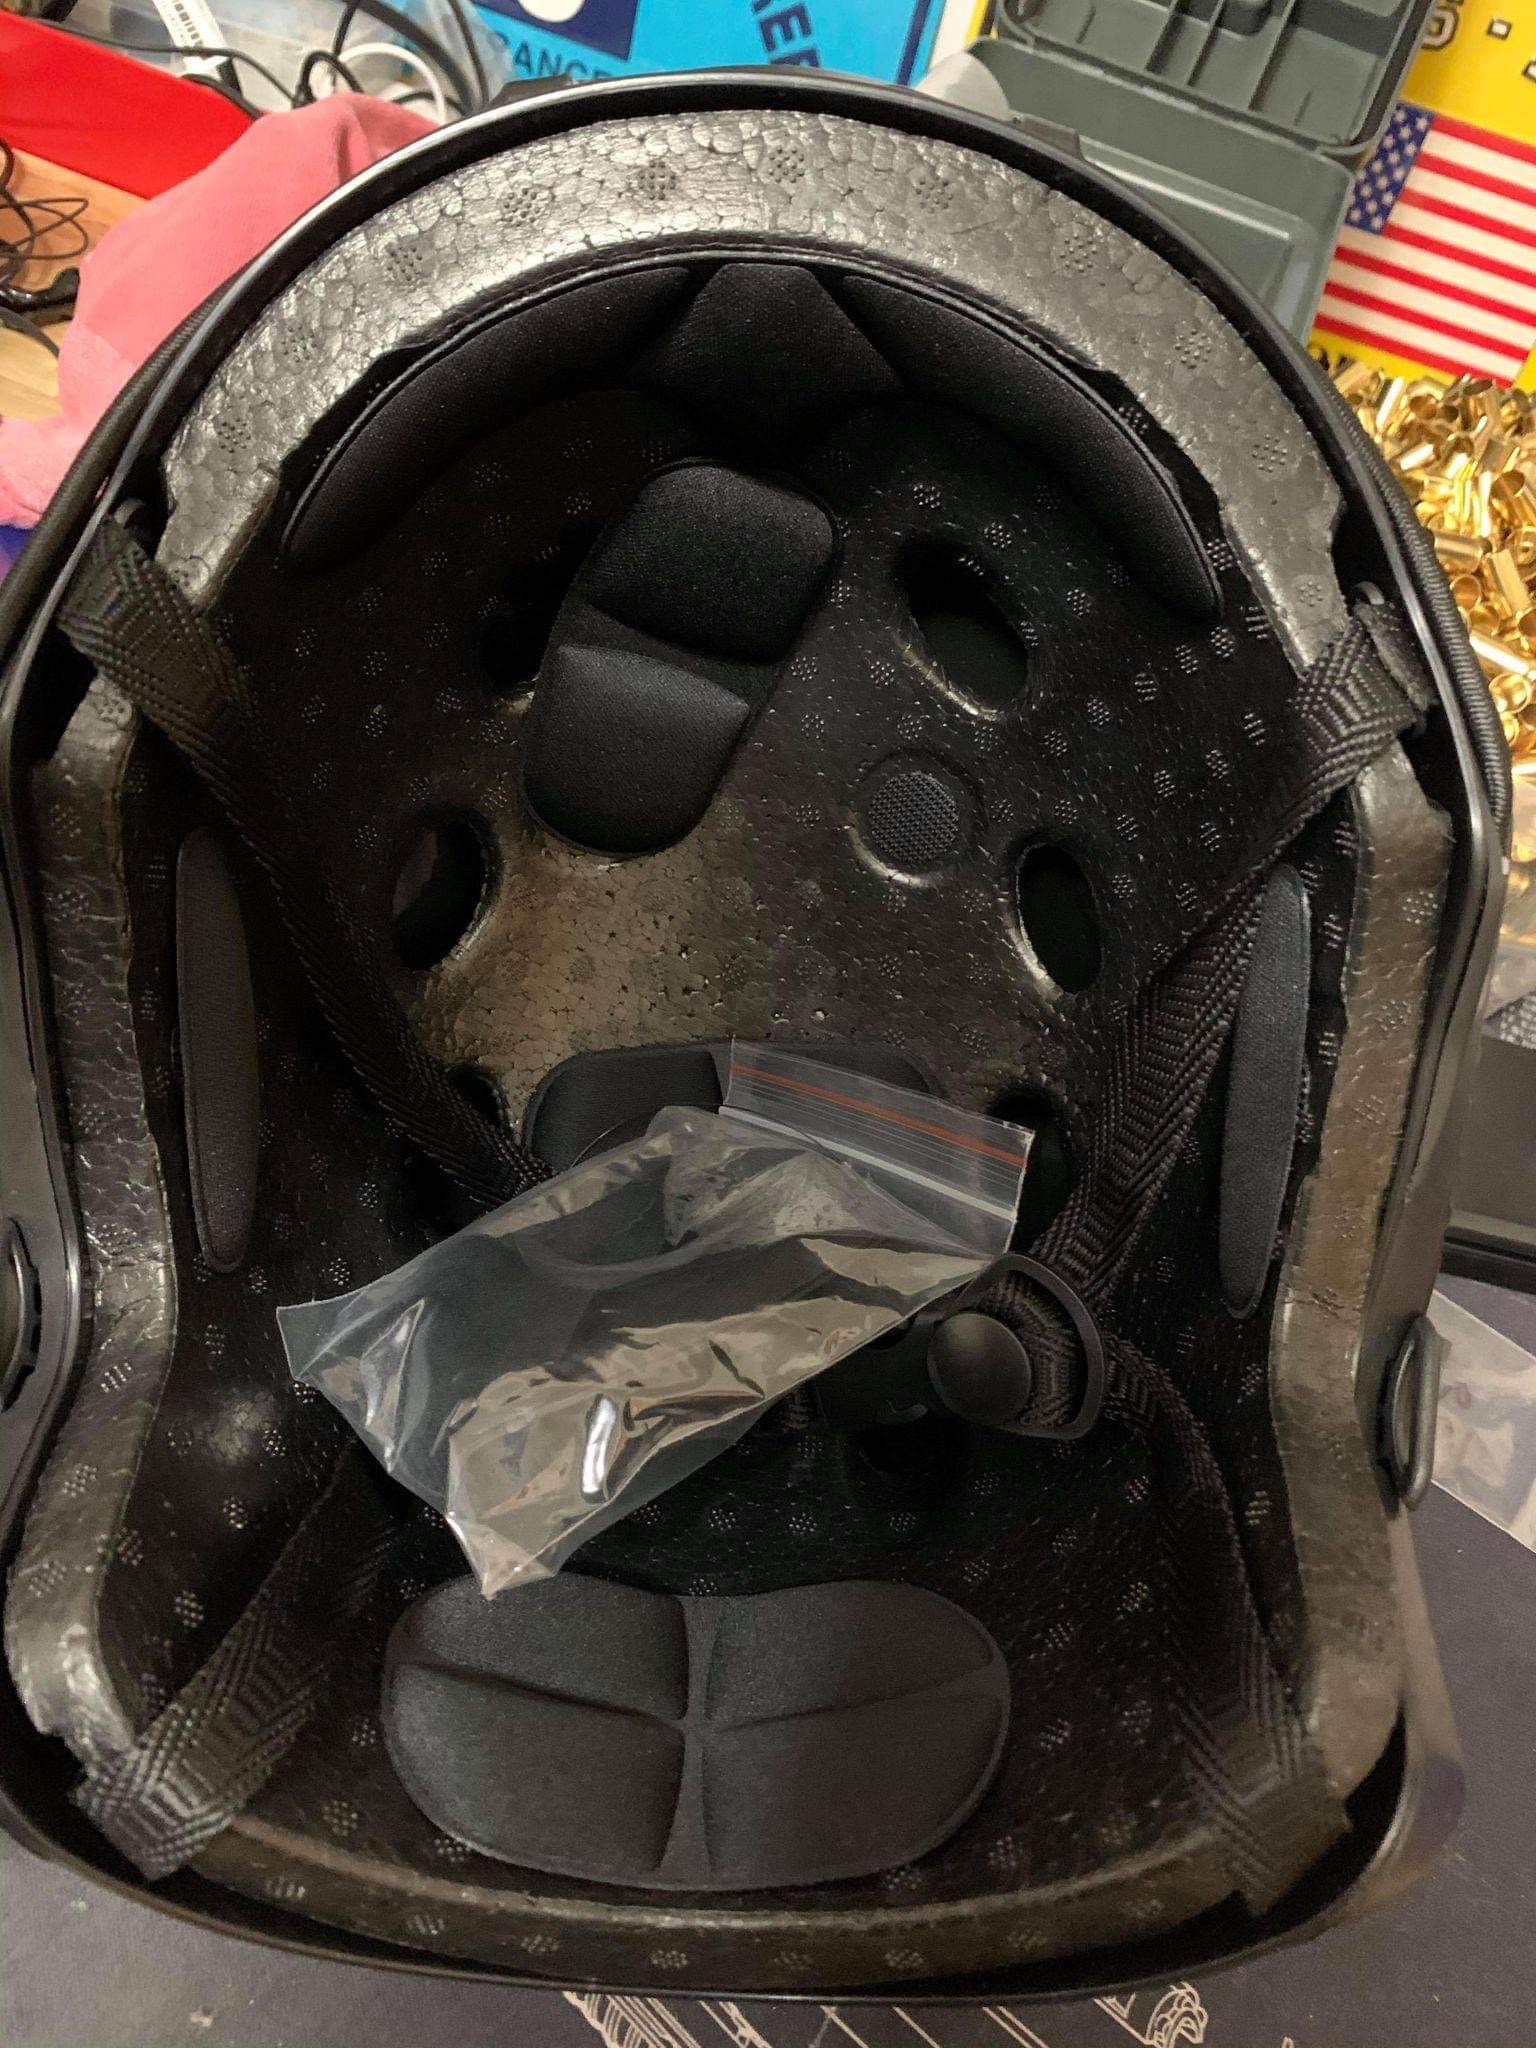 The inside of the helmet I received.